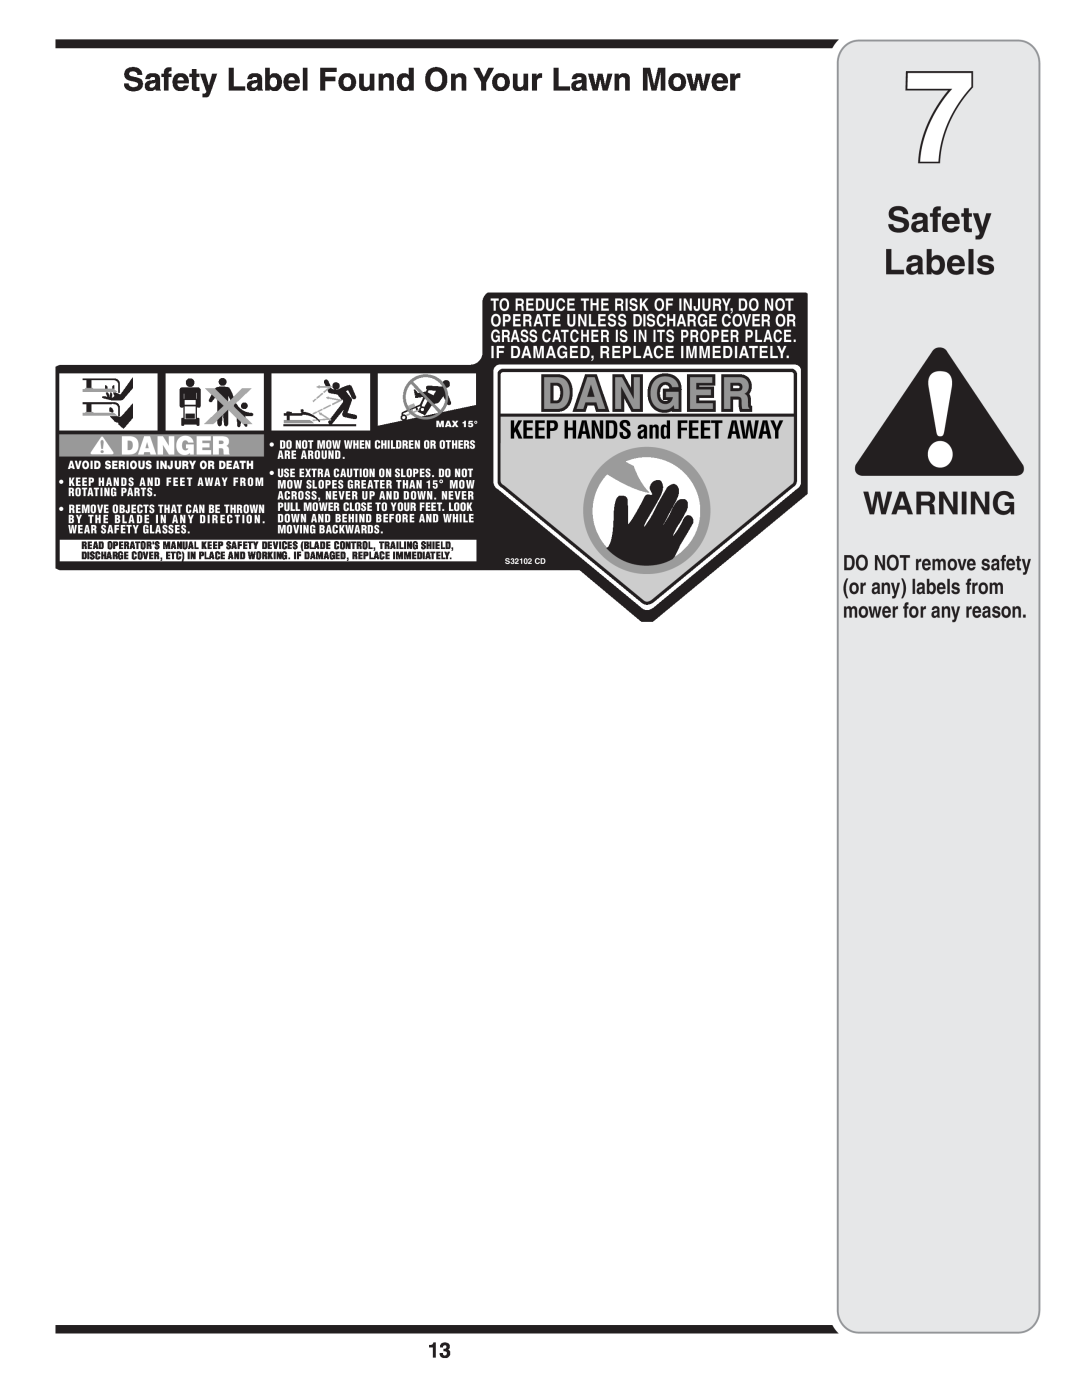 Briggs & Stratton Series 410 thru 420 Safety Labels, Safety Label Found On Your Lawn Mower, KEEP HANDS and FEET AWAY 